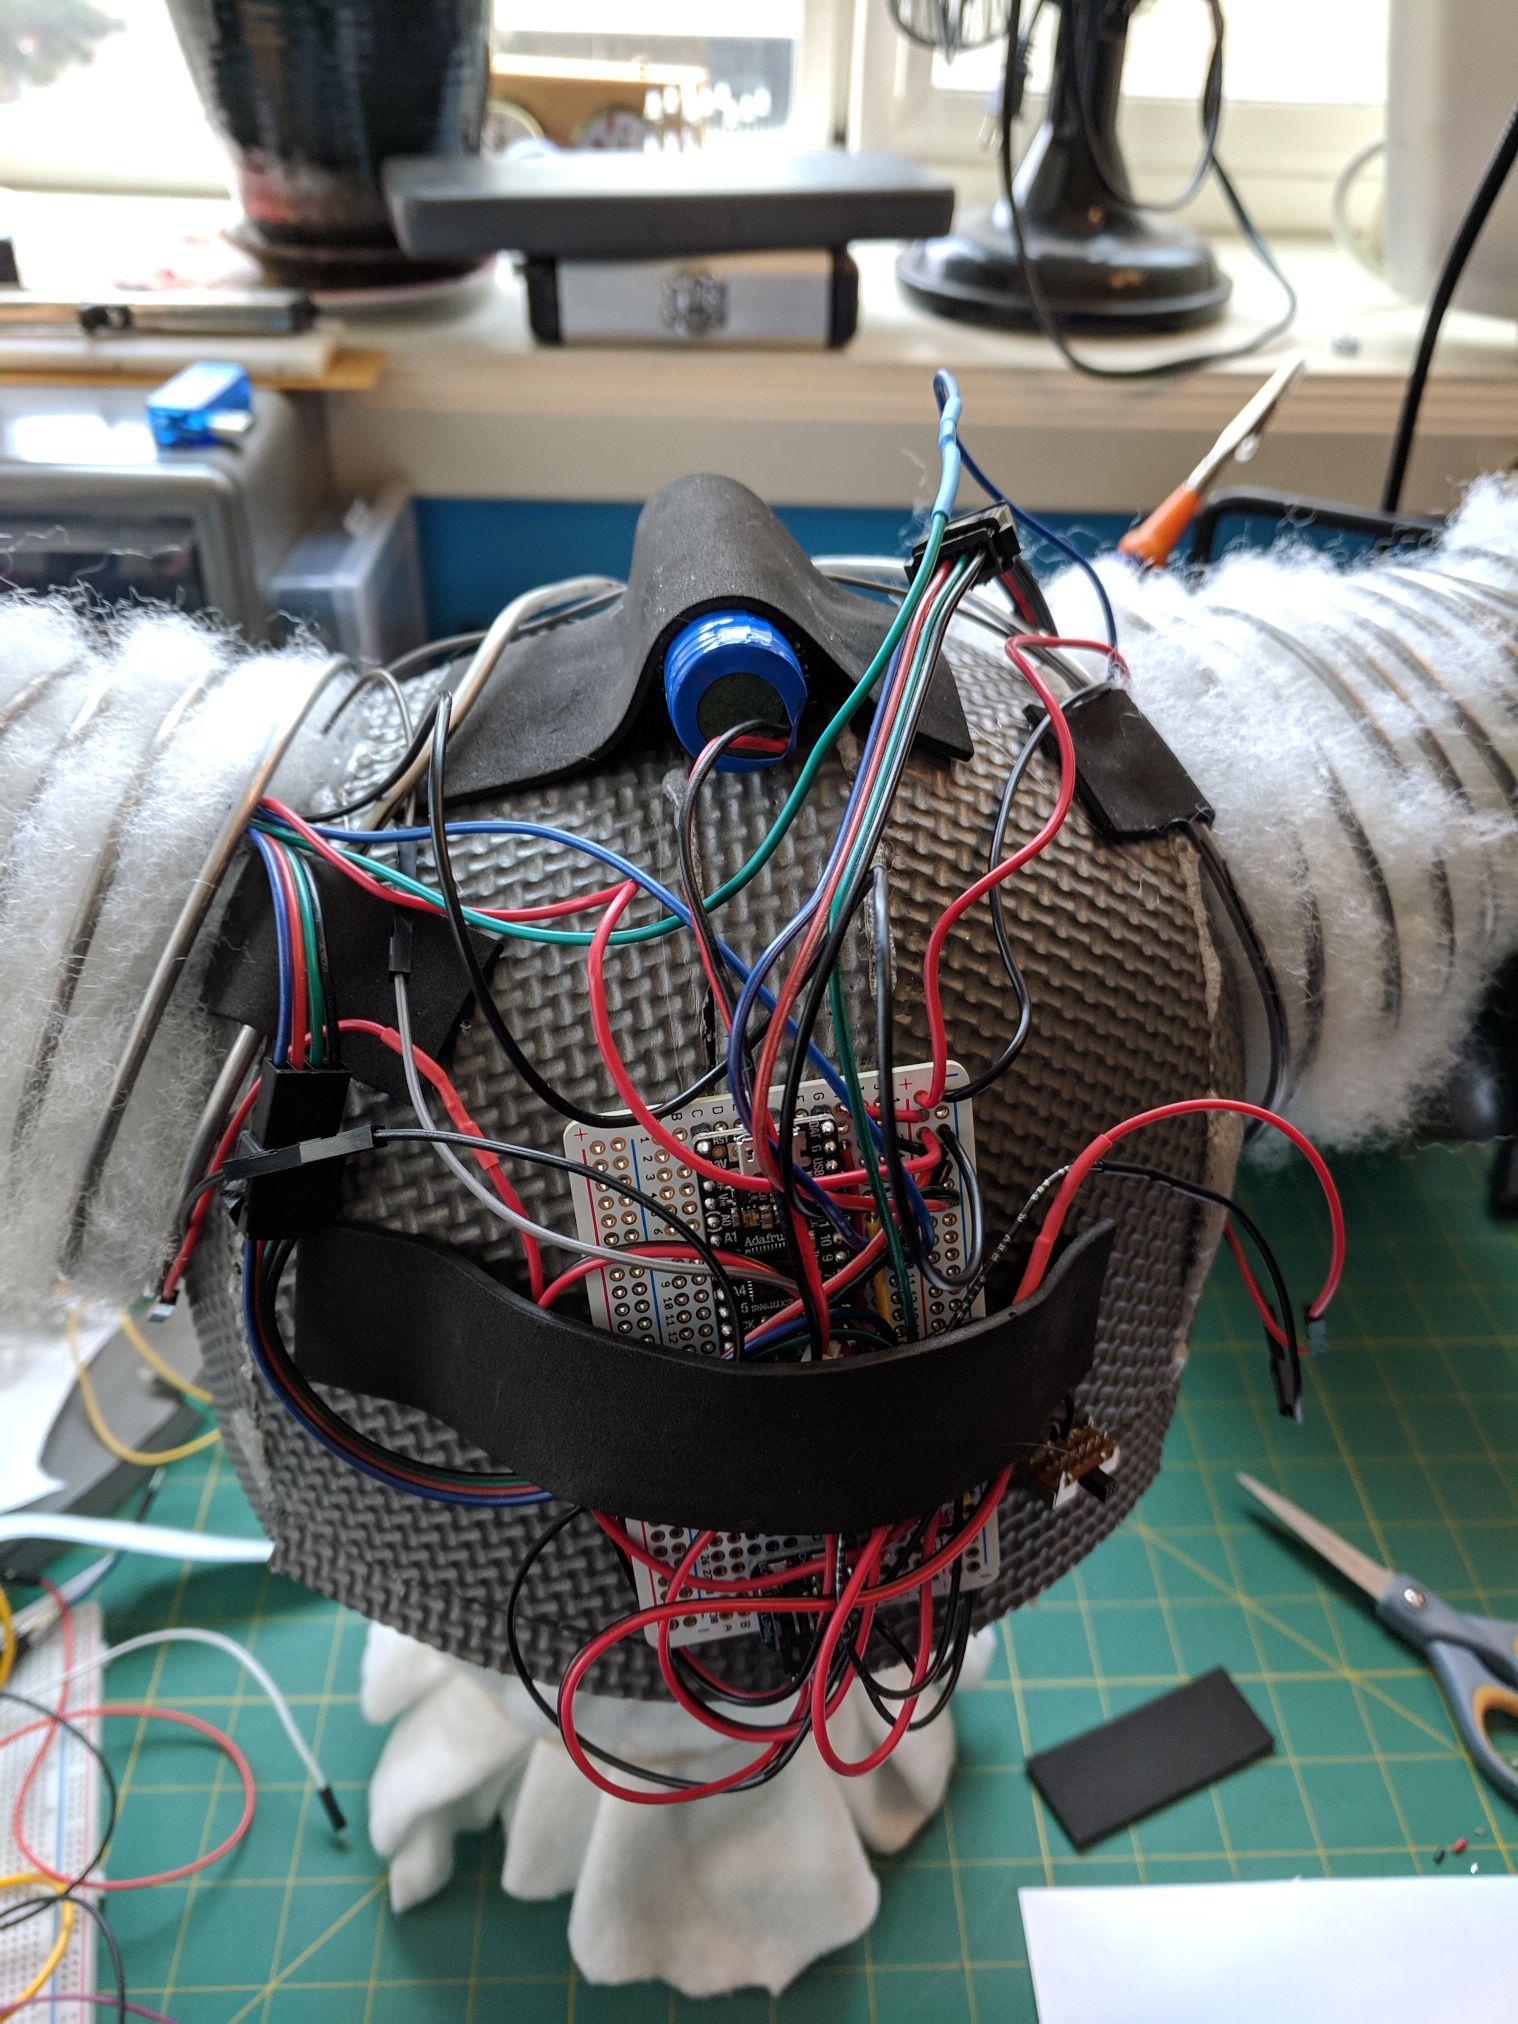 Foam helmet with home made circuit and battery mounted using foam straps